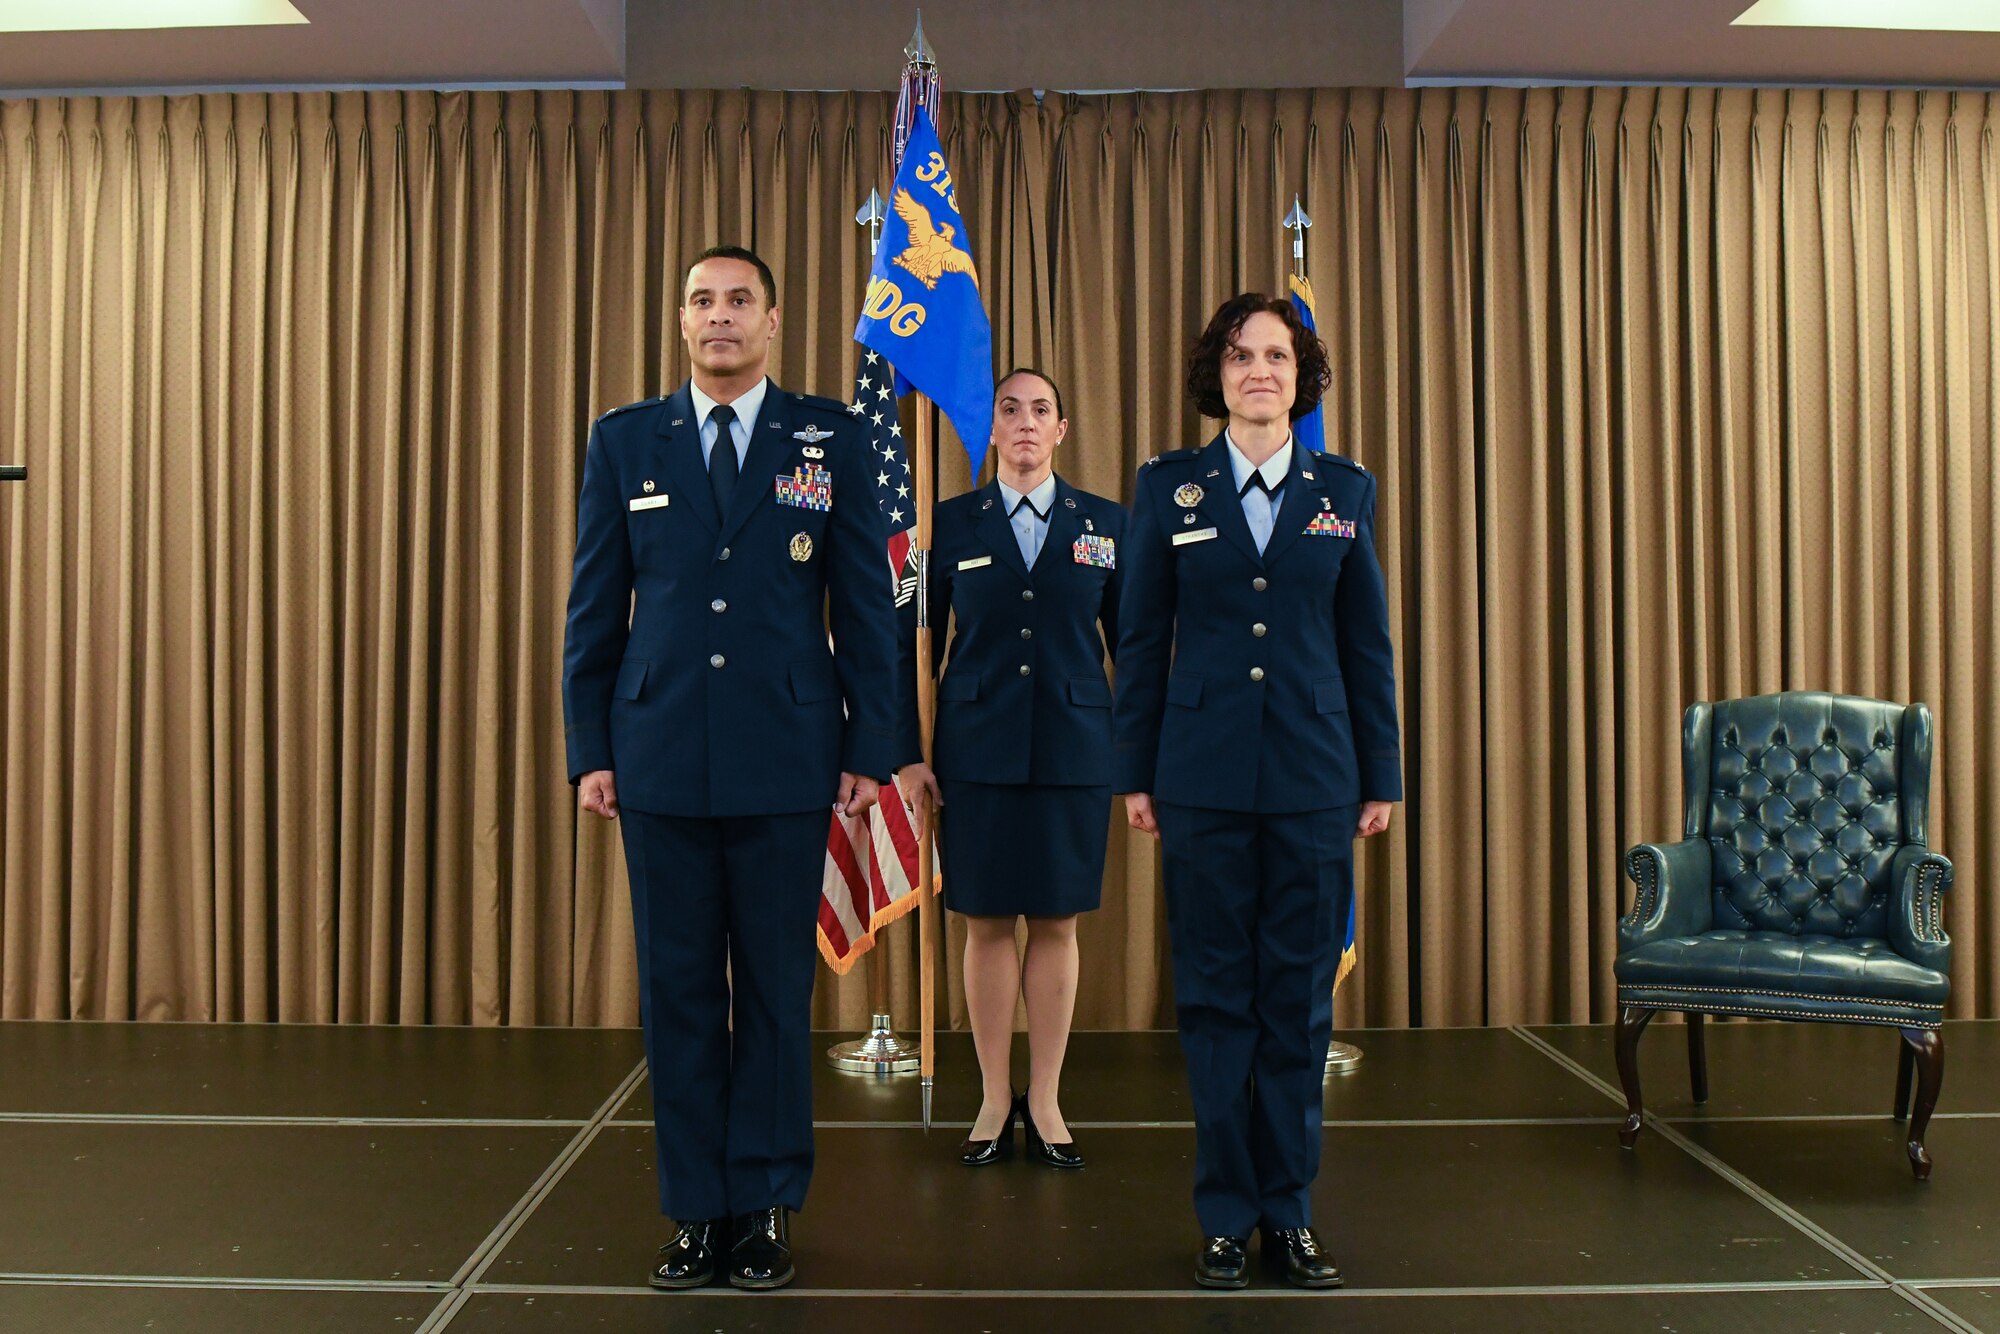 Three people in blue uniforms stand on stage during a ceremony.